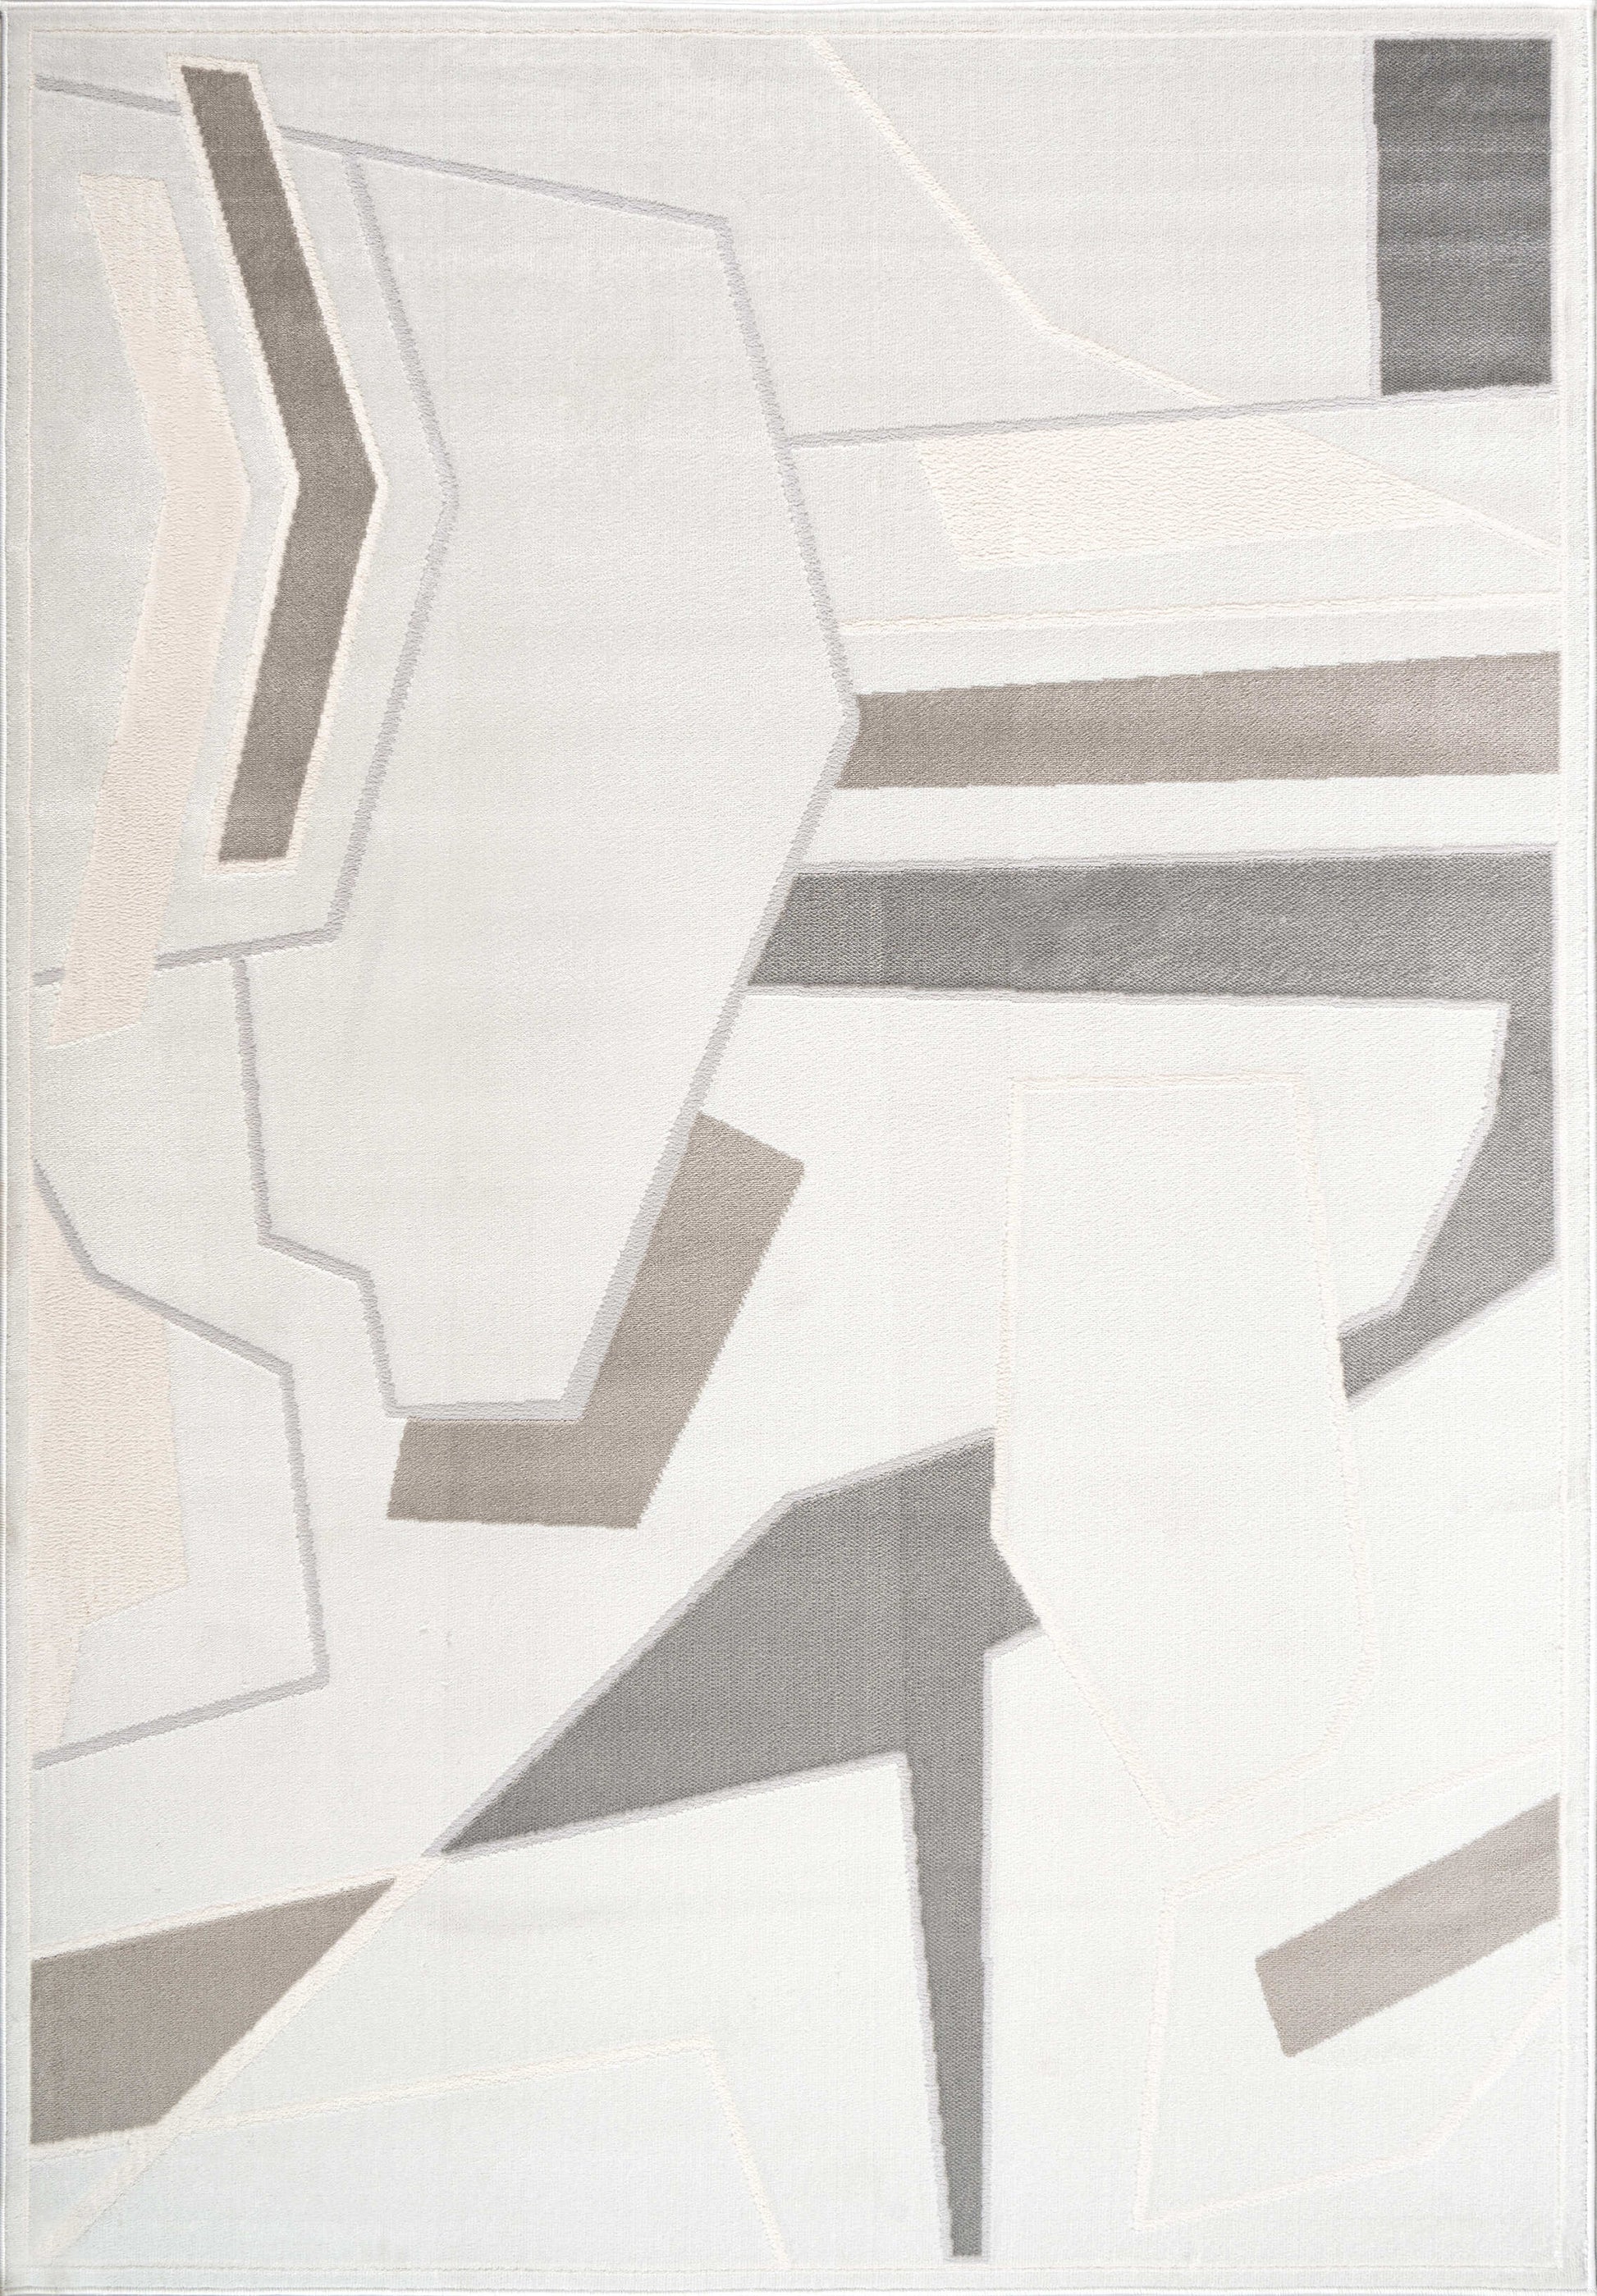 beige brown geometric abstract minimalist modern contemporary area rug for living room bedroom 2x8, 3x10, 2x10 ft Long Runner Rug, Hallway, Balcony, Entry Way, Kitchen, Stairs